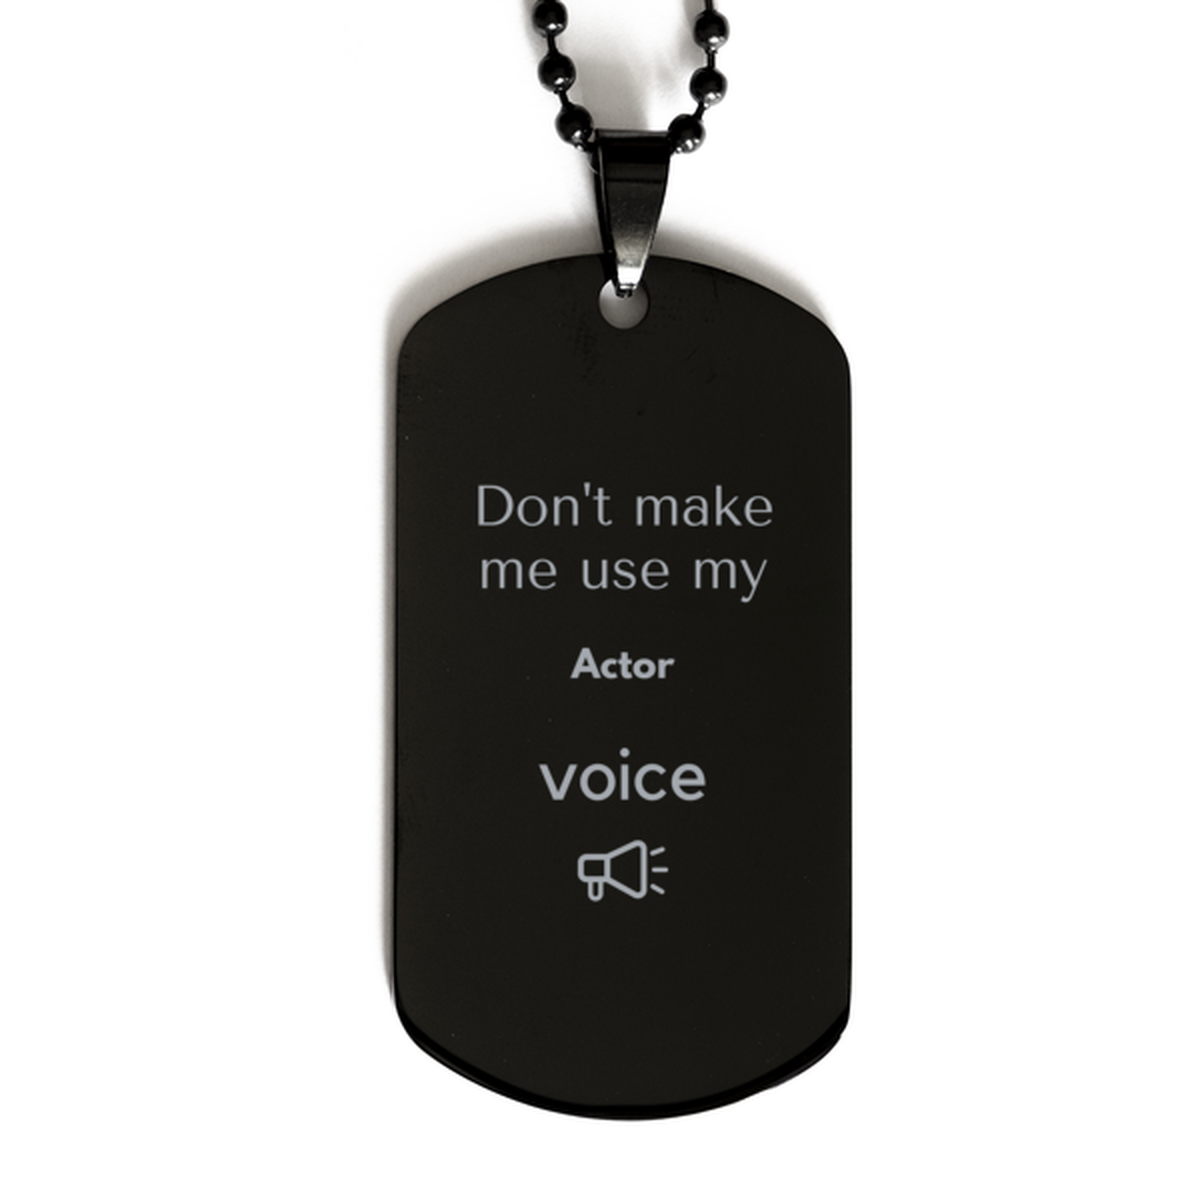 Don't make me use my Actor voice, Sarcasm Actor Gifts, Christmas Actor Black Dog Tag Birthday Unique Gifts For Actor Coworkers, Men, Women, Colleague, Friends